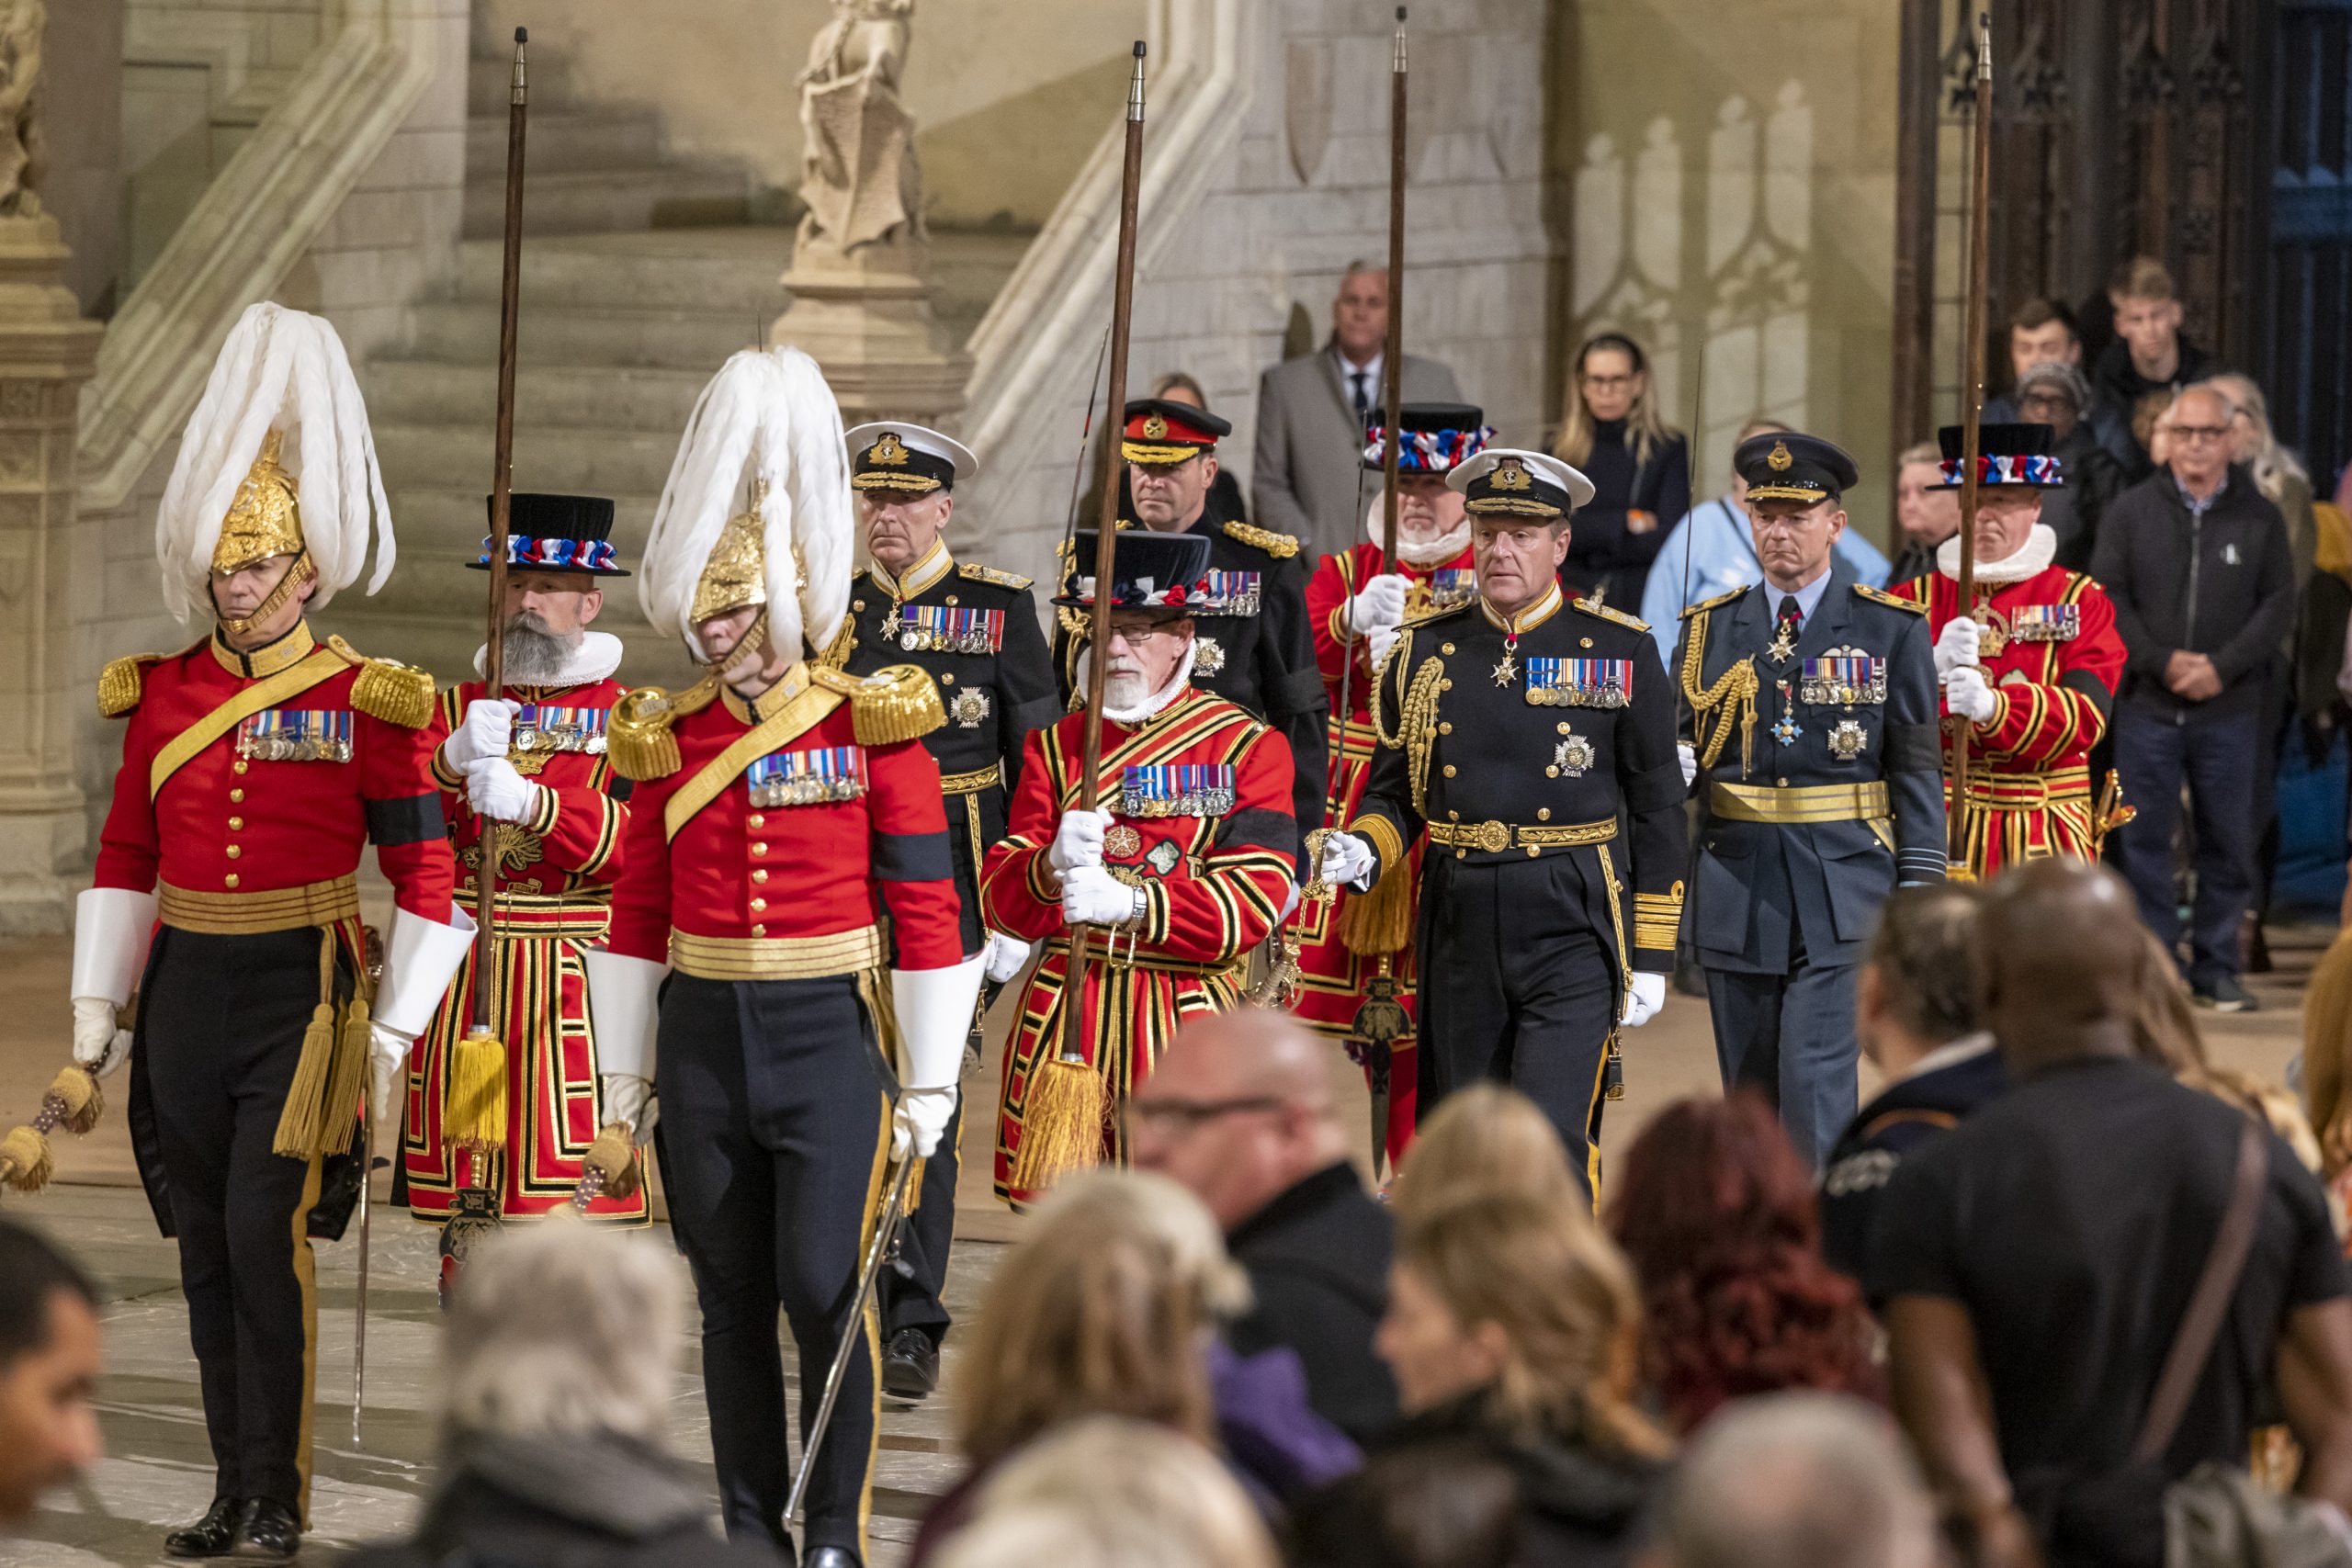 Service Chiefs Stand Vigil At The Queen’s Coffin As She Lay In State In Westminster Hall.